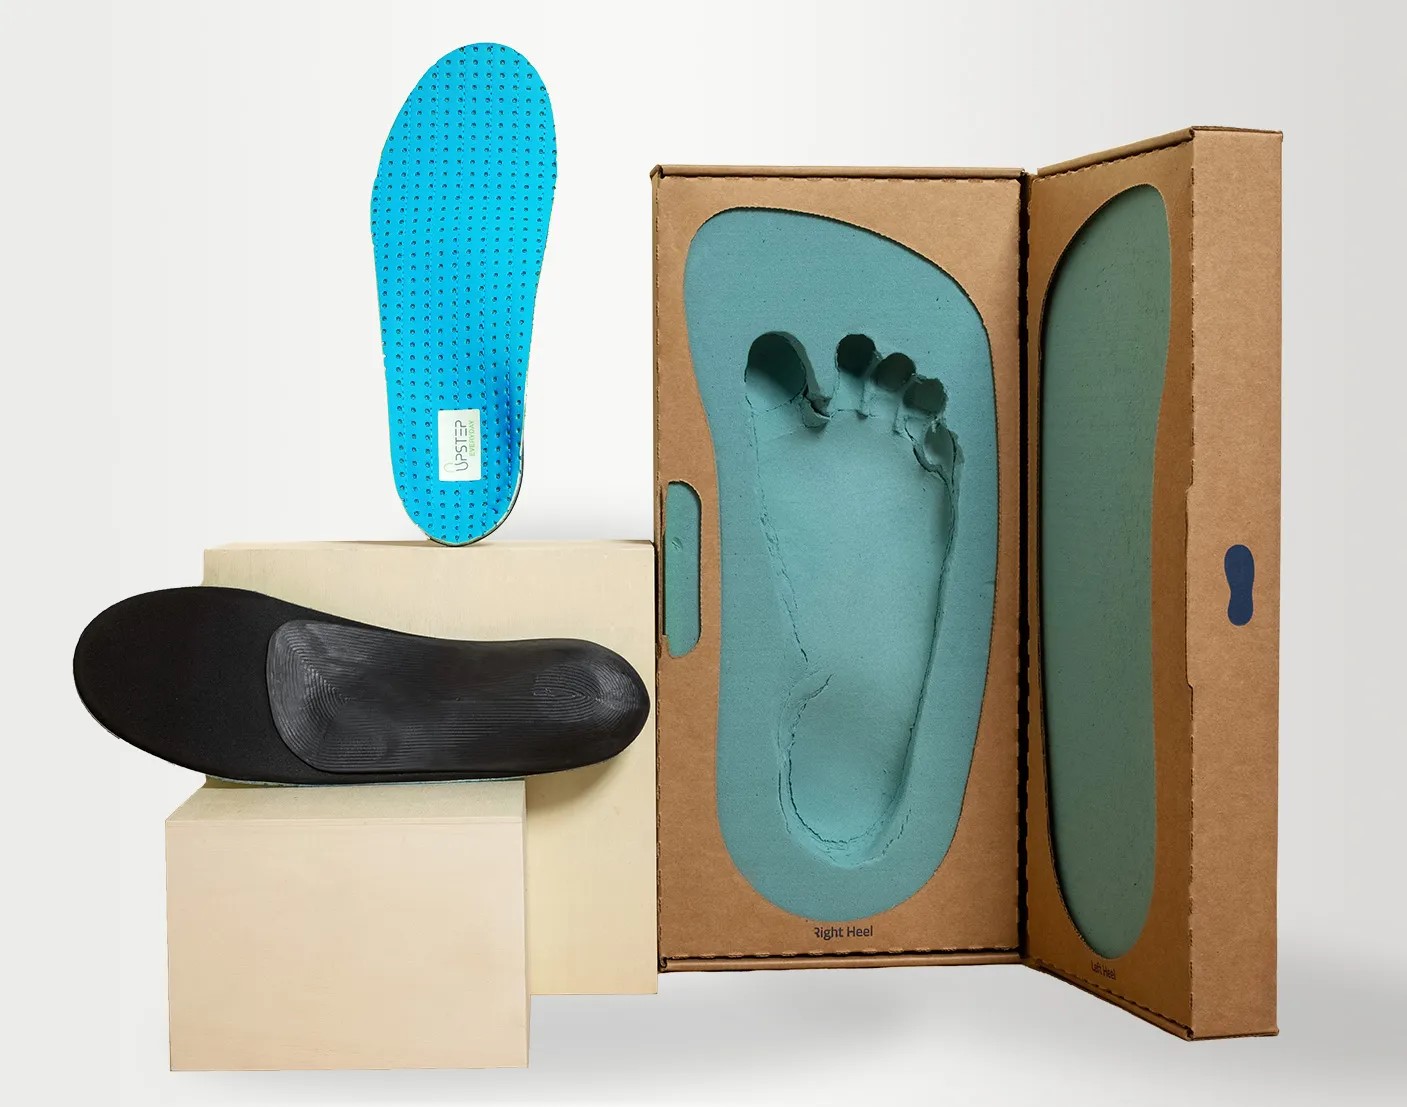 Upstep custom orthotics for heel pain displayed on pedestals with a foot cast on the right